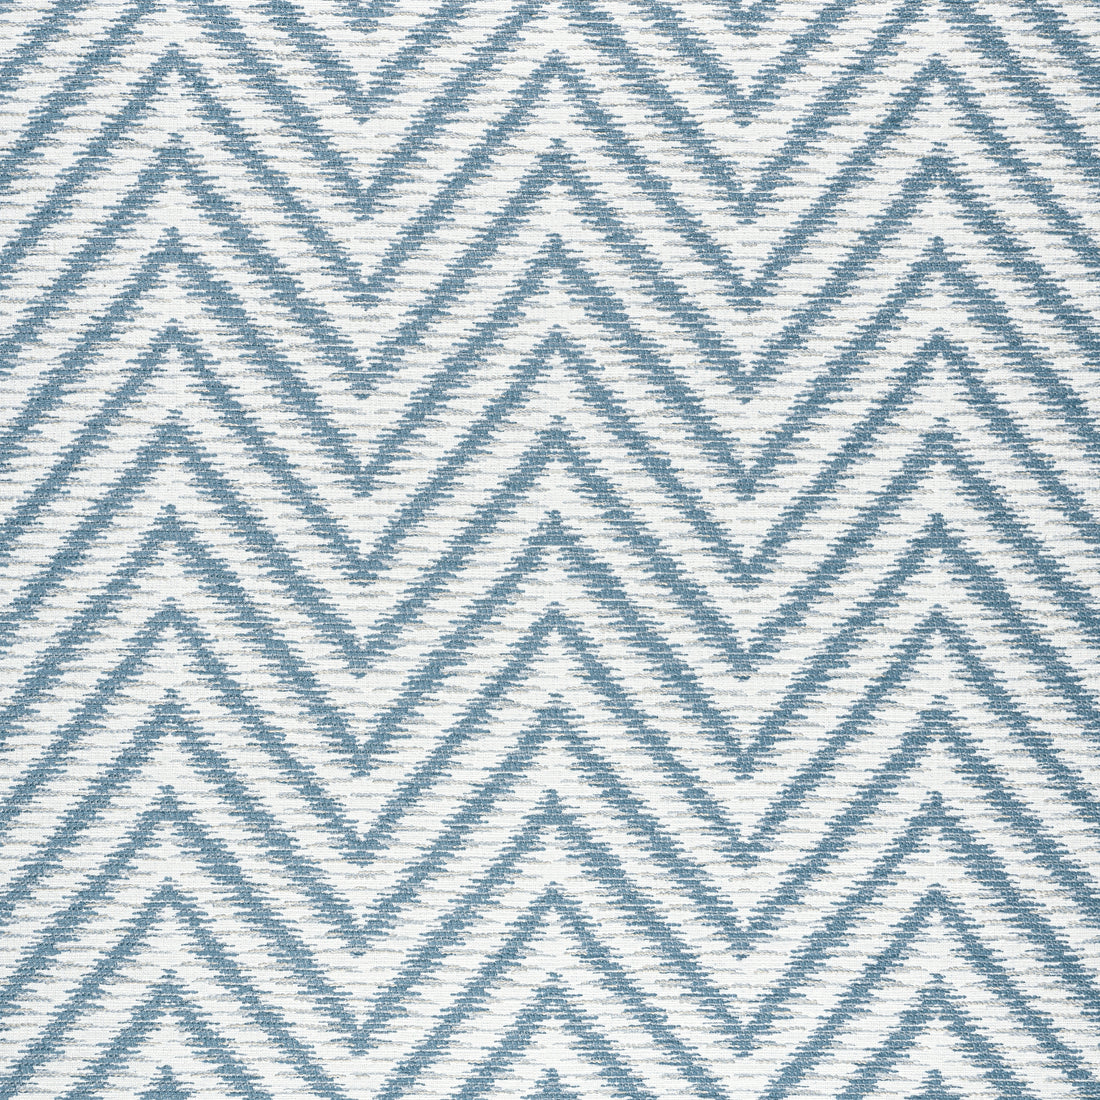 Aliso fabric in ocean color - pattern number W8821 - by Thibaut in the Haven collection